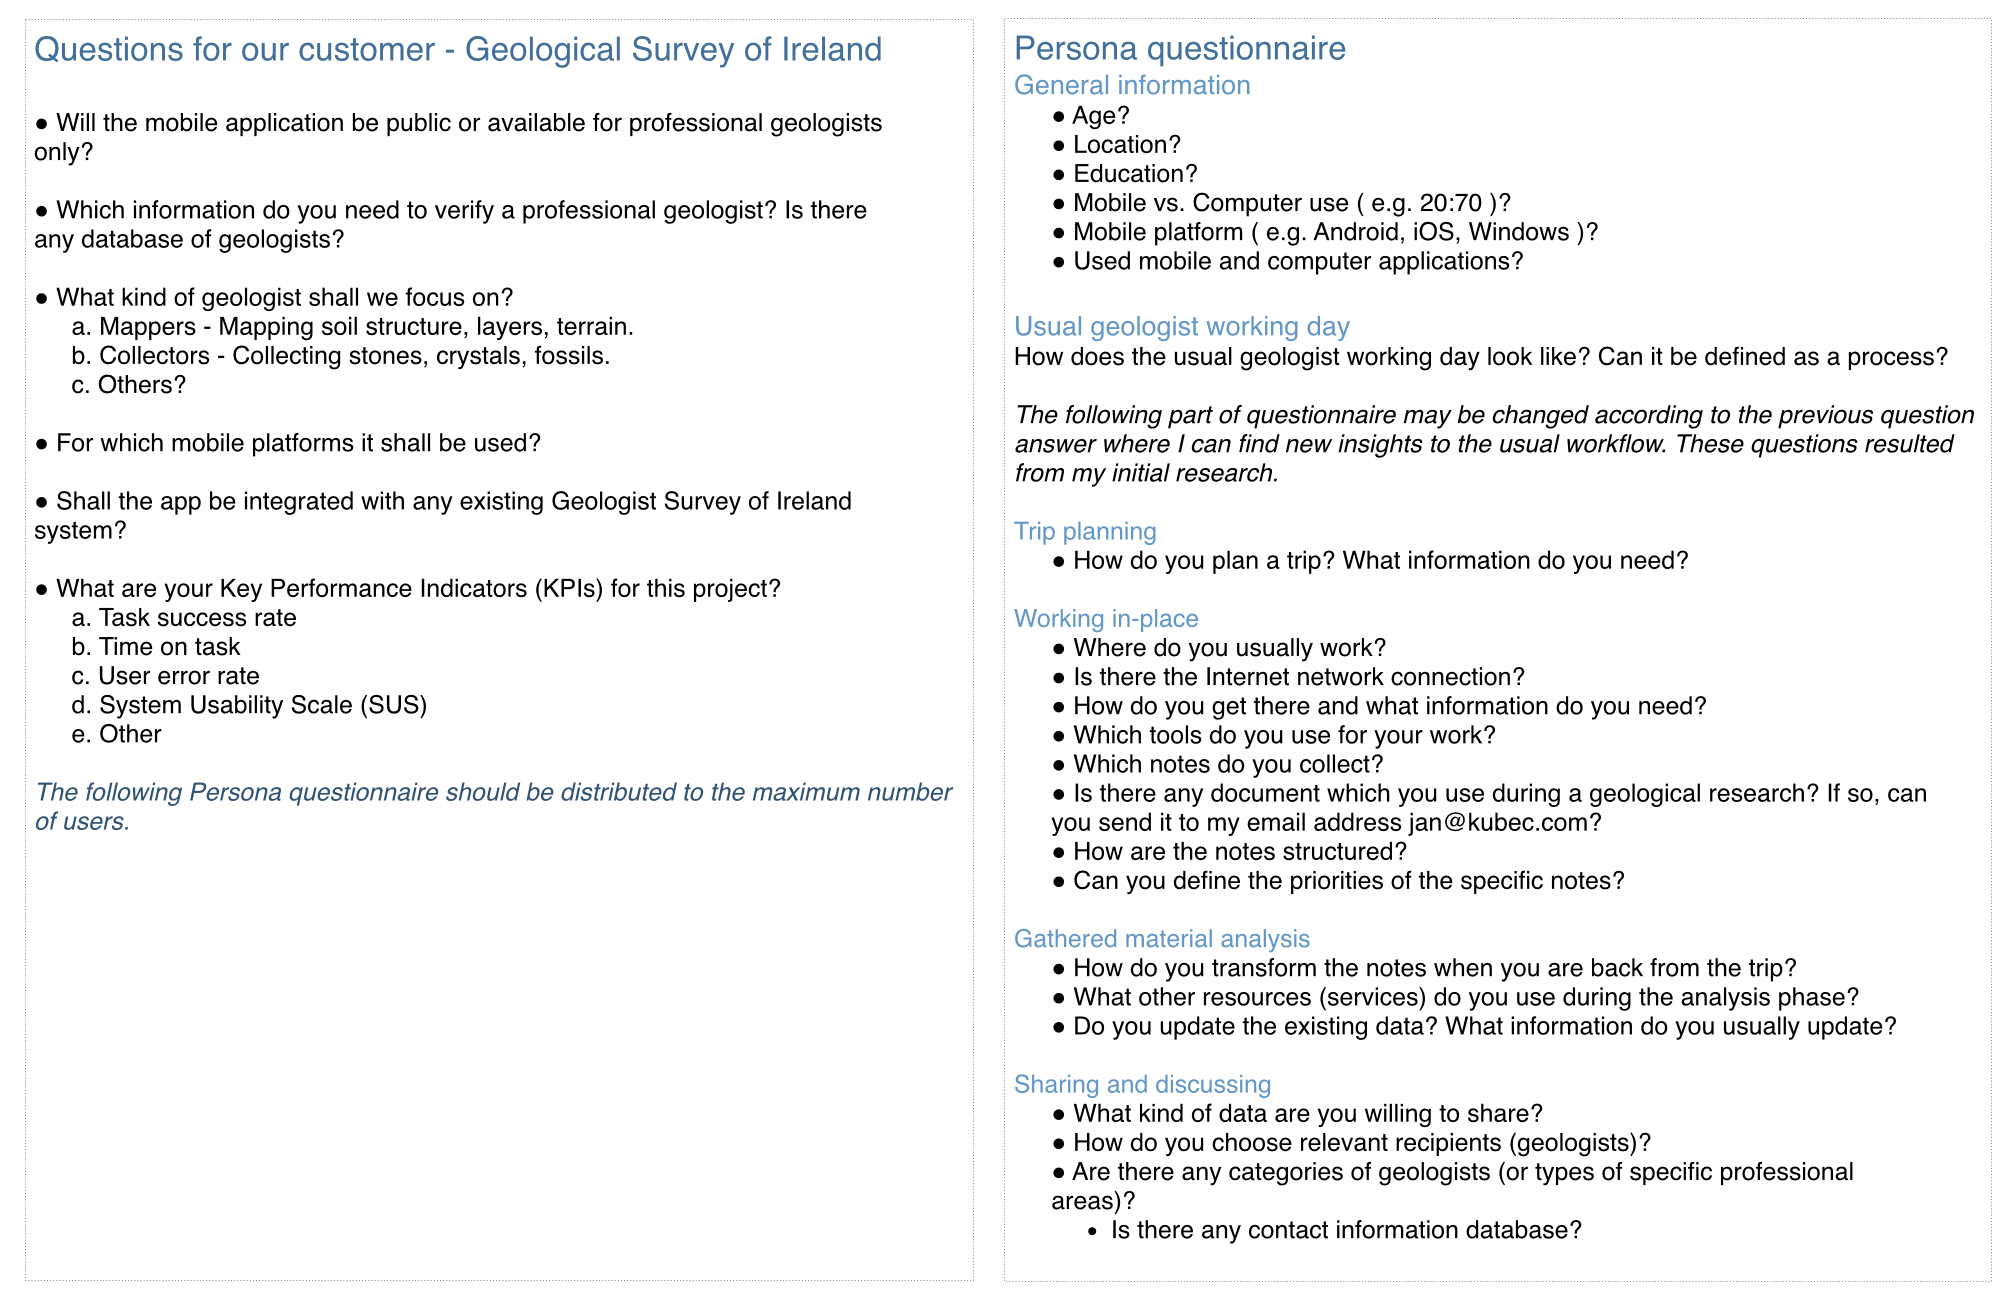 User Research - My own initial research - Questionnaire for client and users